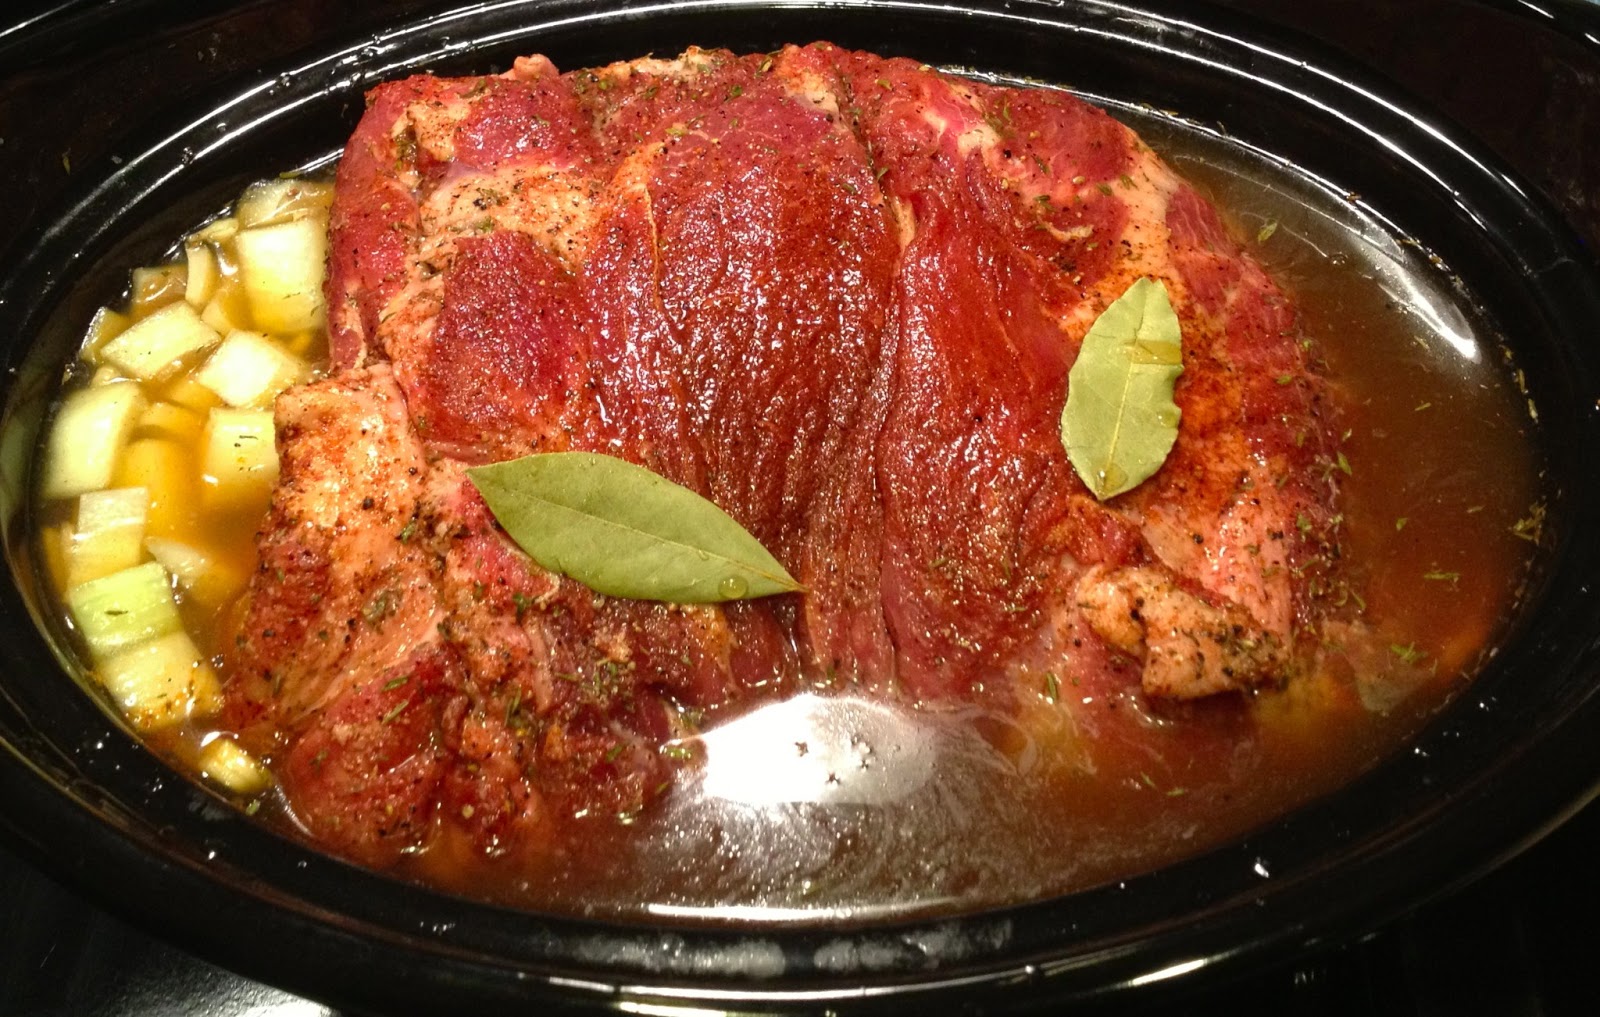 The Paleo Review: Slow Cooker Braised Boston Butt Roast